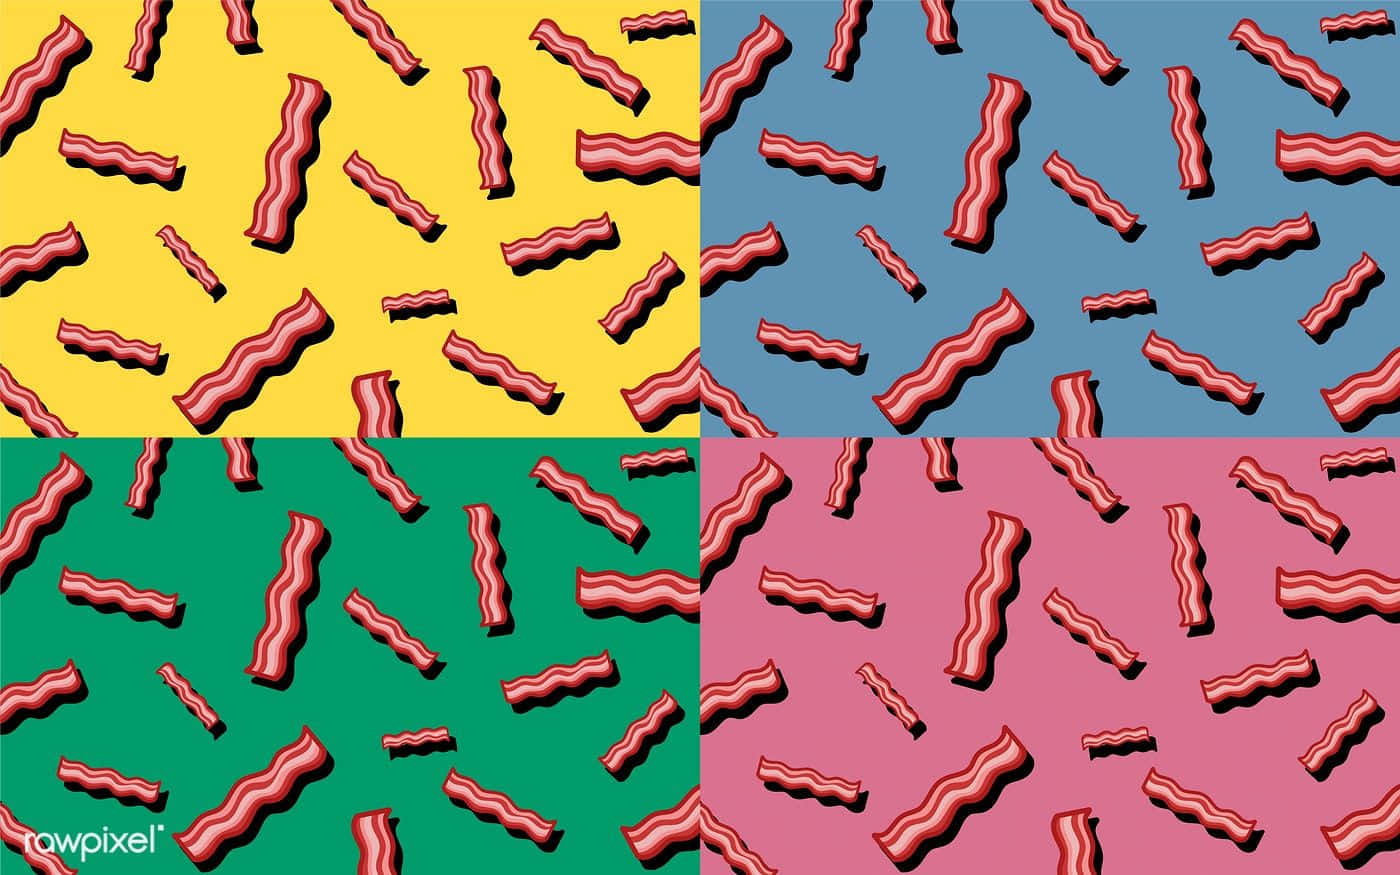 Four Different Patterns Of Bacon In Different Colors